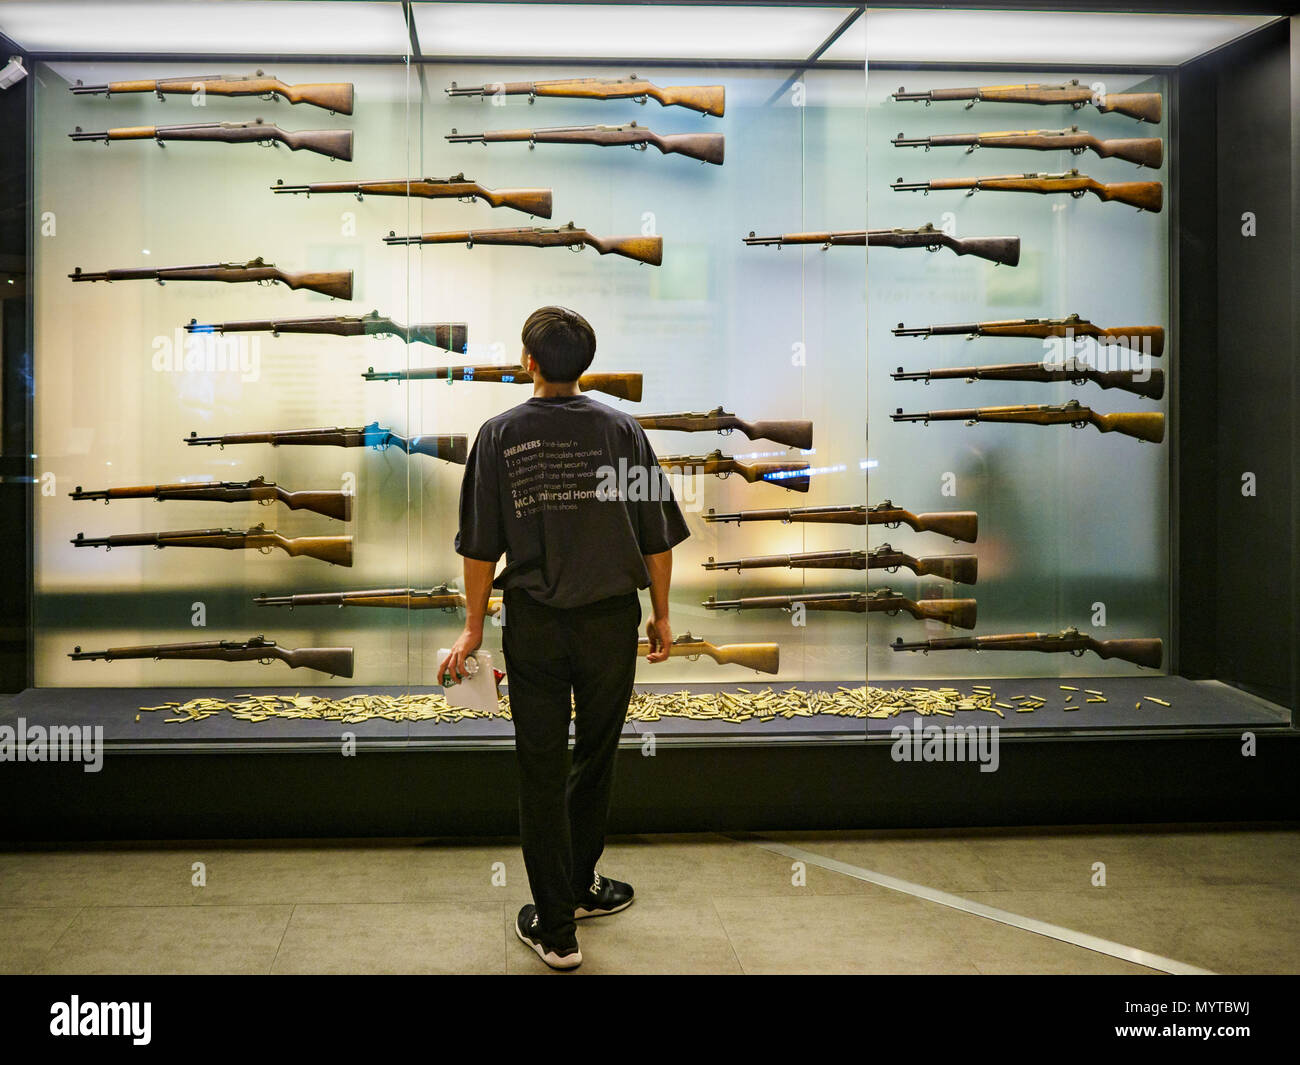 June 8, 2018 - Seoul, Gyeonggi, South Korea - A teenager looks at a display of M1 Garand rifles at the War Memorial of Korea in Seoul, South Korea. The M1 was carried by US soldiers in the Korean War and was the South Korean service rifle for many years. With the near constant threat of invasion from North Korea, many South Koreans take great pride in the ability of their armed forces. Some observers believe there is a possibility that a peace agreement between South and North Korea could be signed following the Trump/Kim summit in Singapore. The War Memorial and museum opened in 1994 on the f Stock Photo